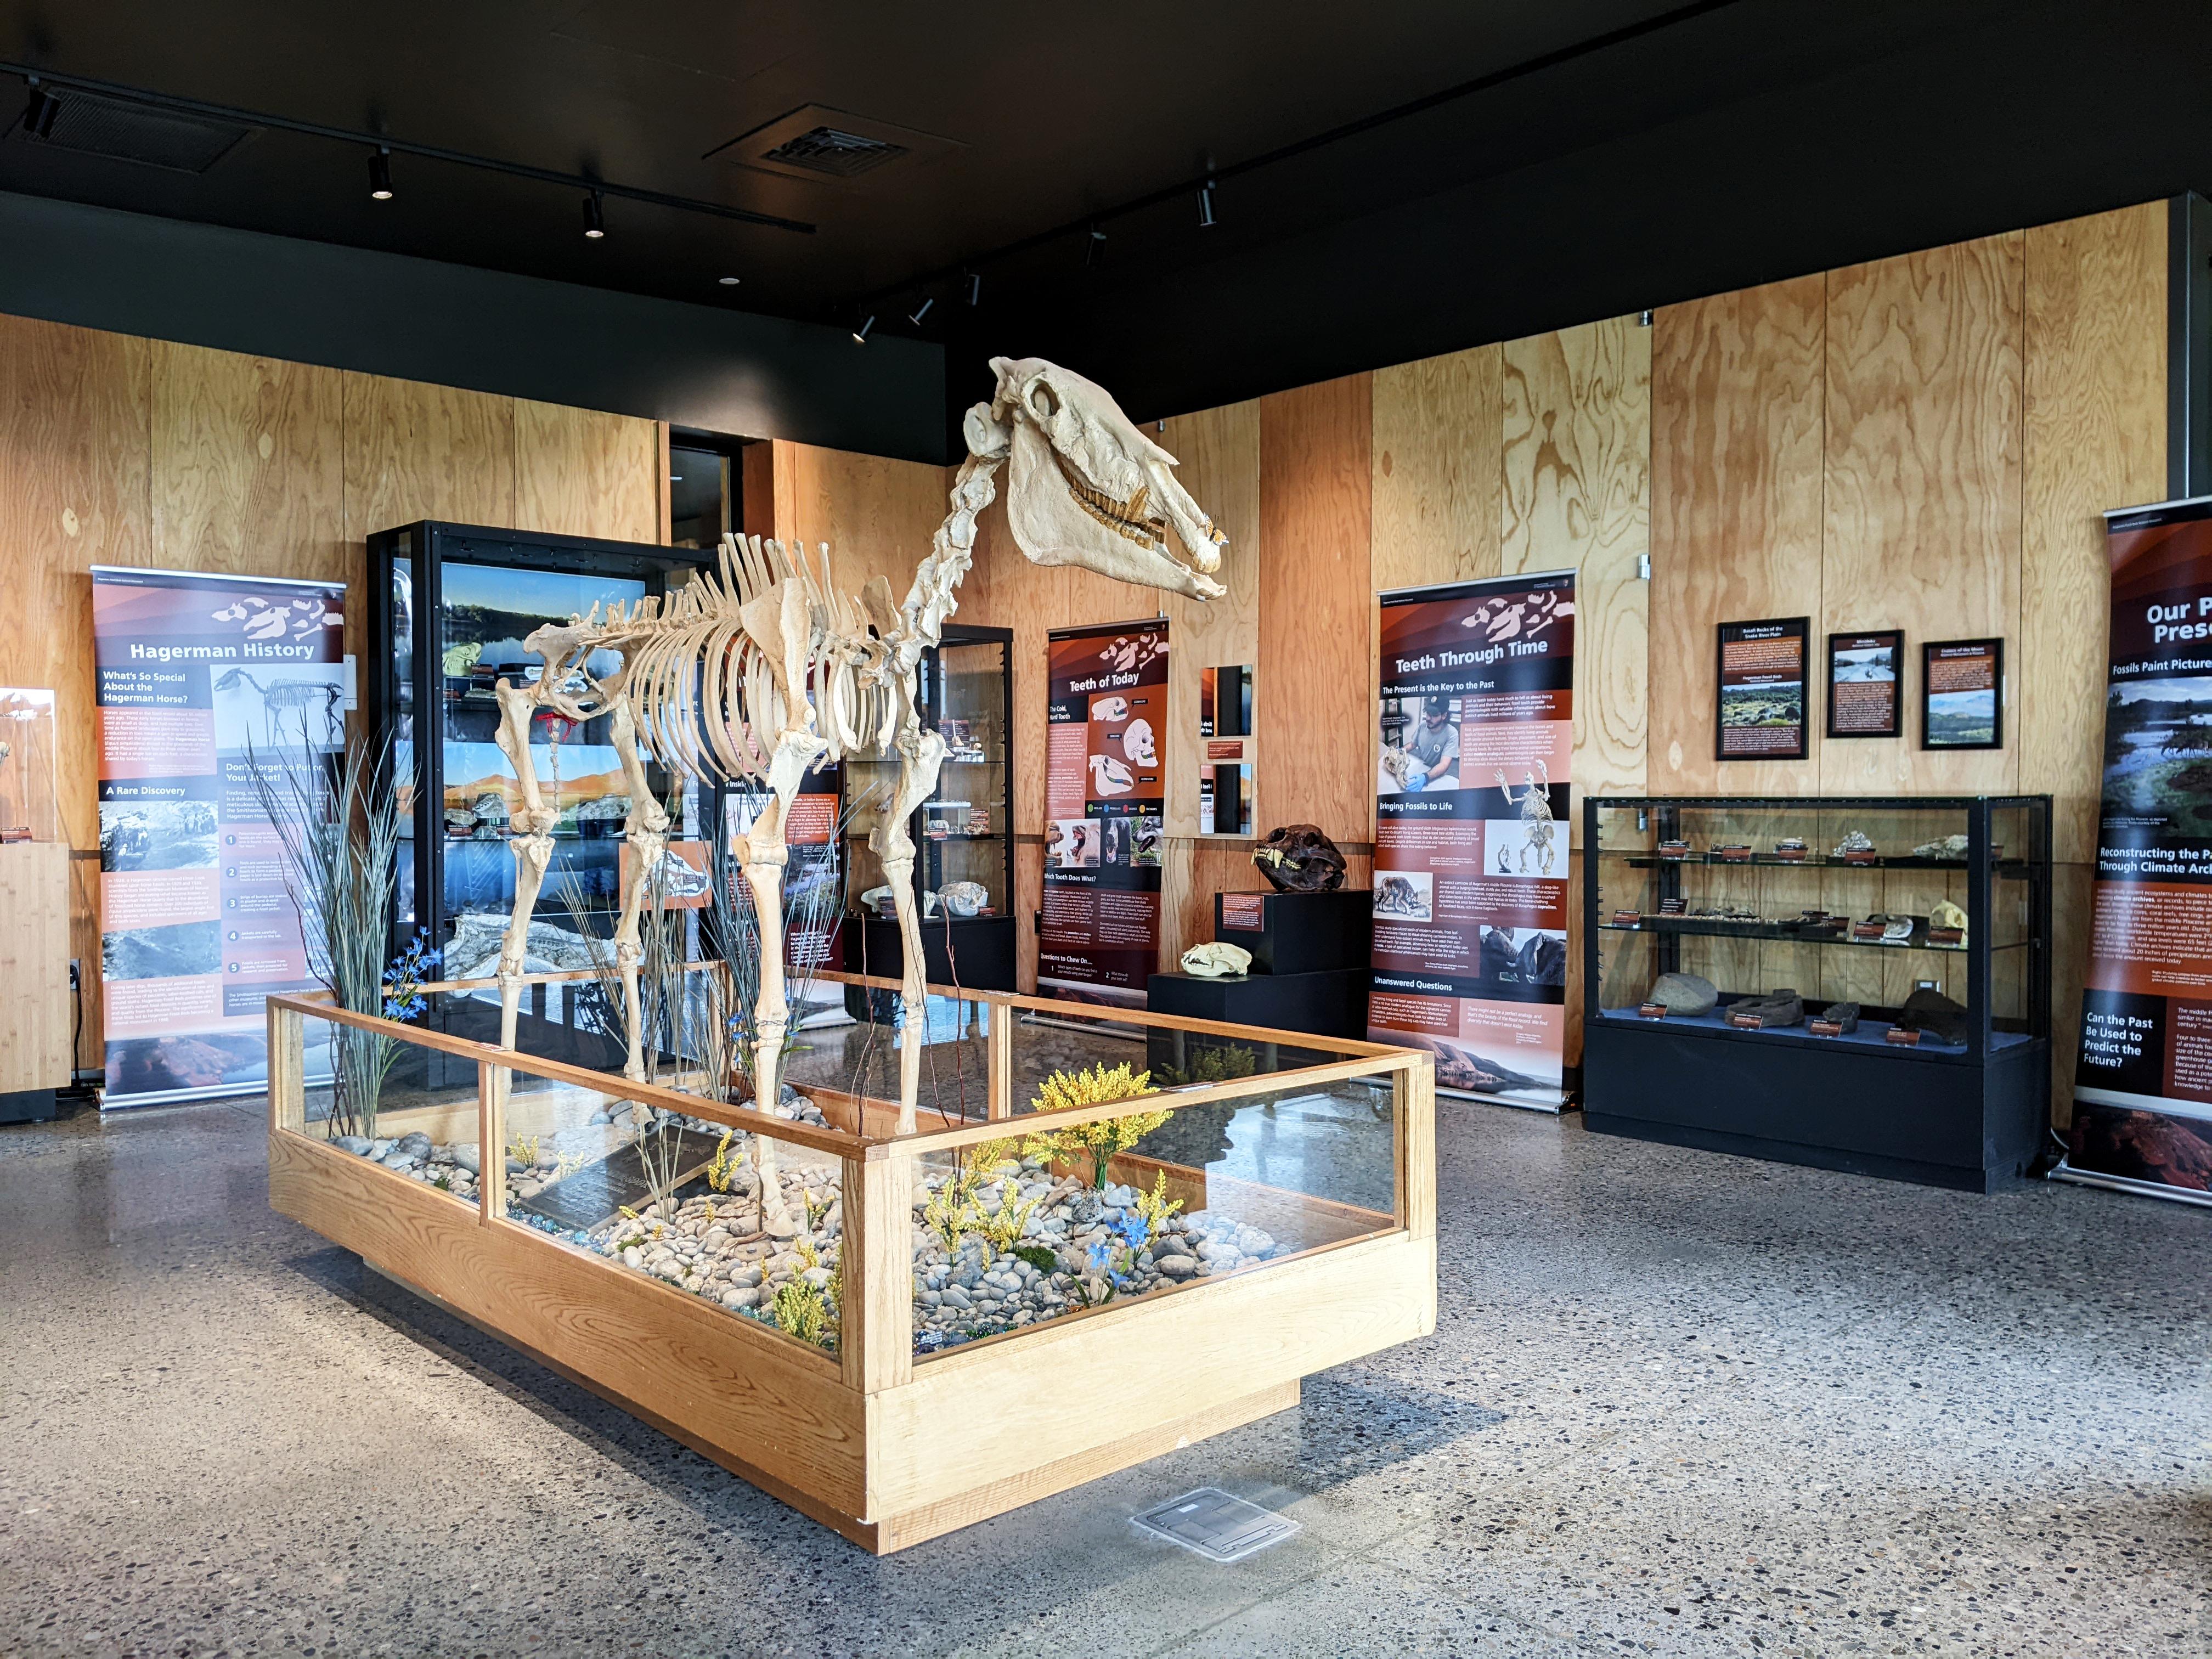 A fossil horse stands in the center of a room filled with posters and display cases